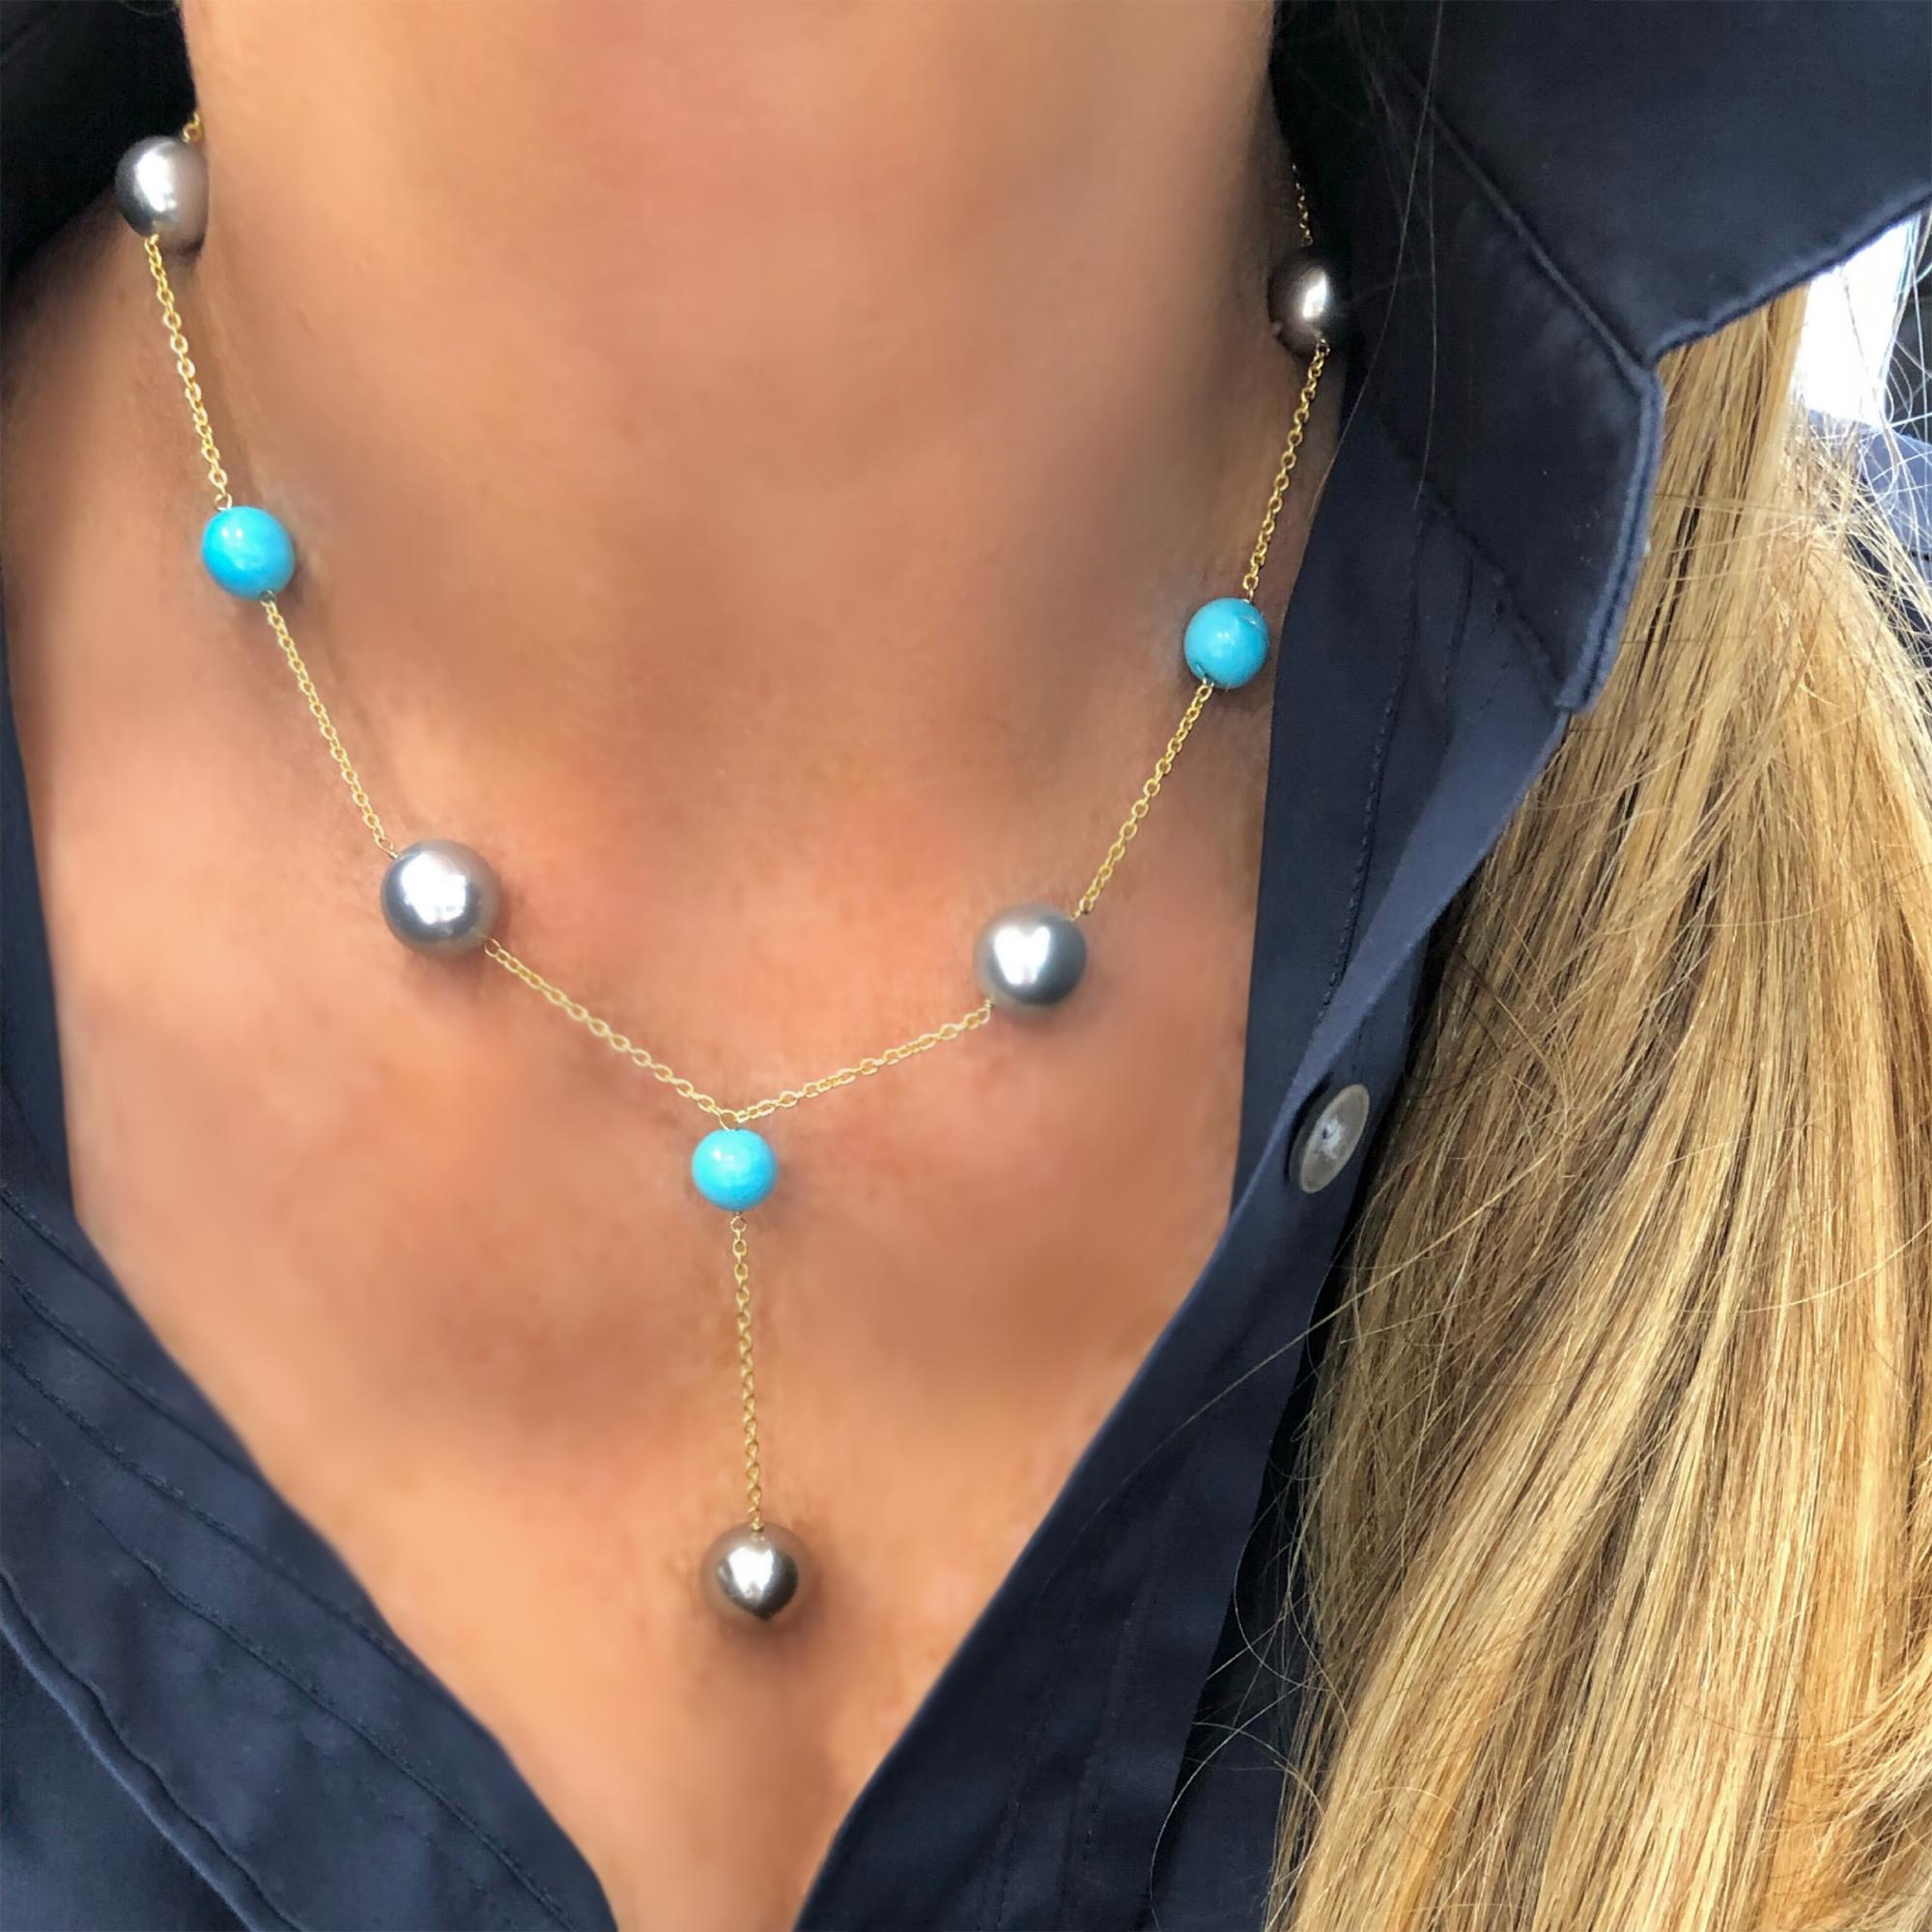 Contemporary Rosaria Varra Tahitian Pearl and Turquoise Bead Lariat Necklace in 18k For Sale